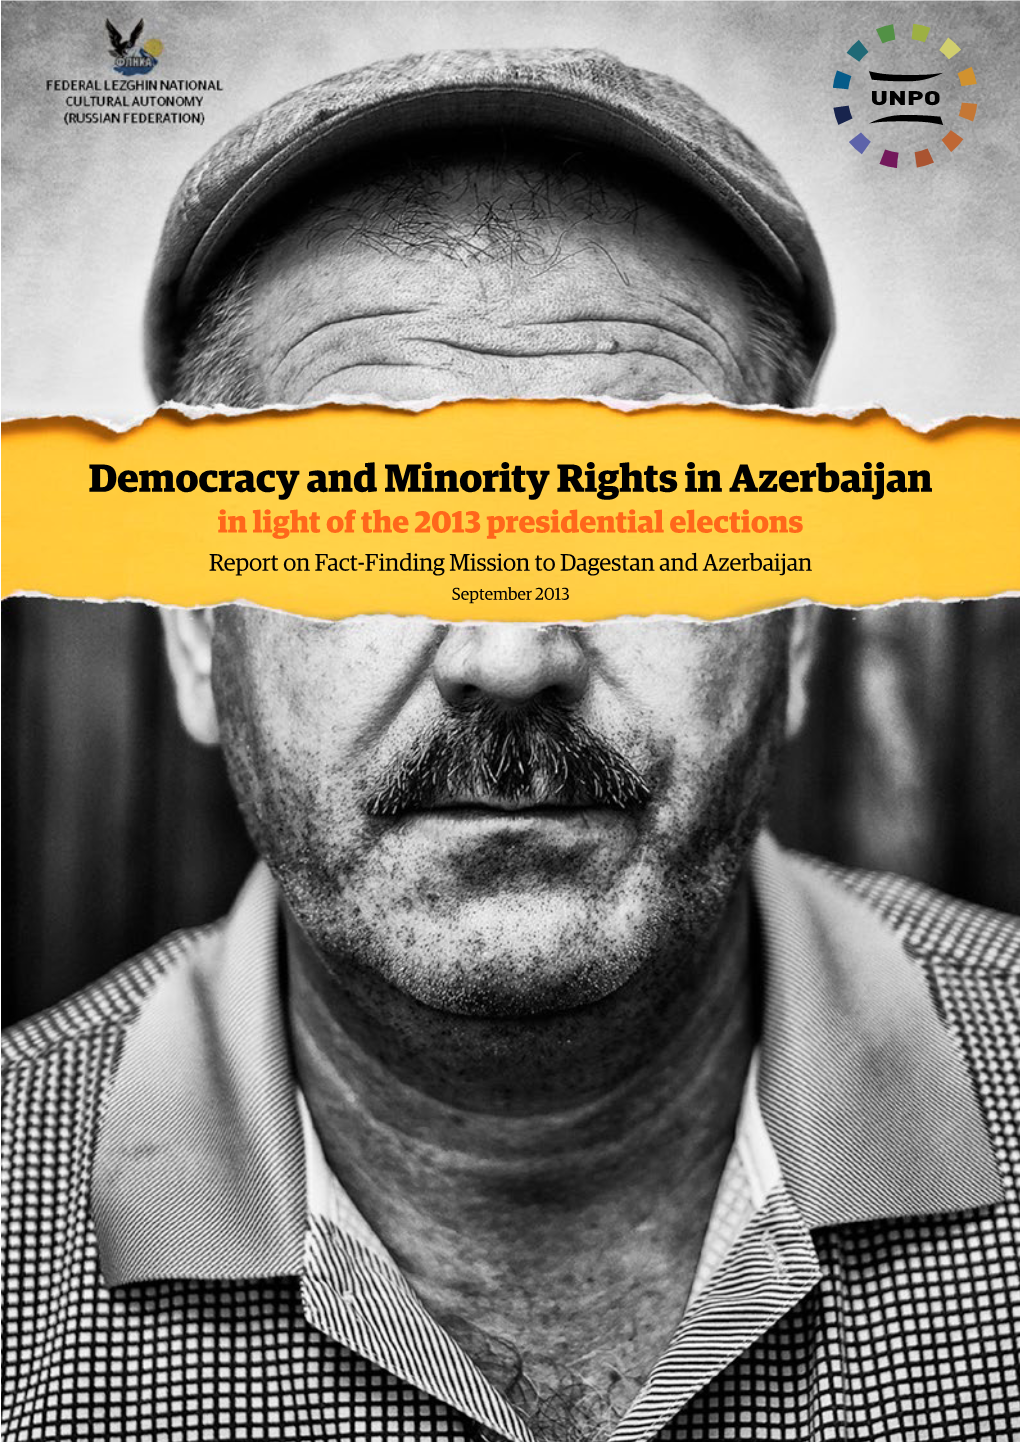 Democracy and Minority Rights in Azerbaijan in Light of the 2013 Presidential Elections Report on Fact-Finding Mission to Dagestan and Azerbaijan September 2013